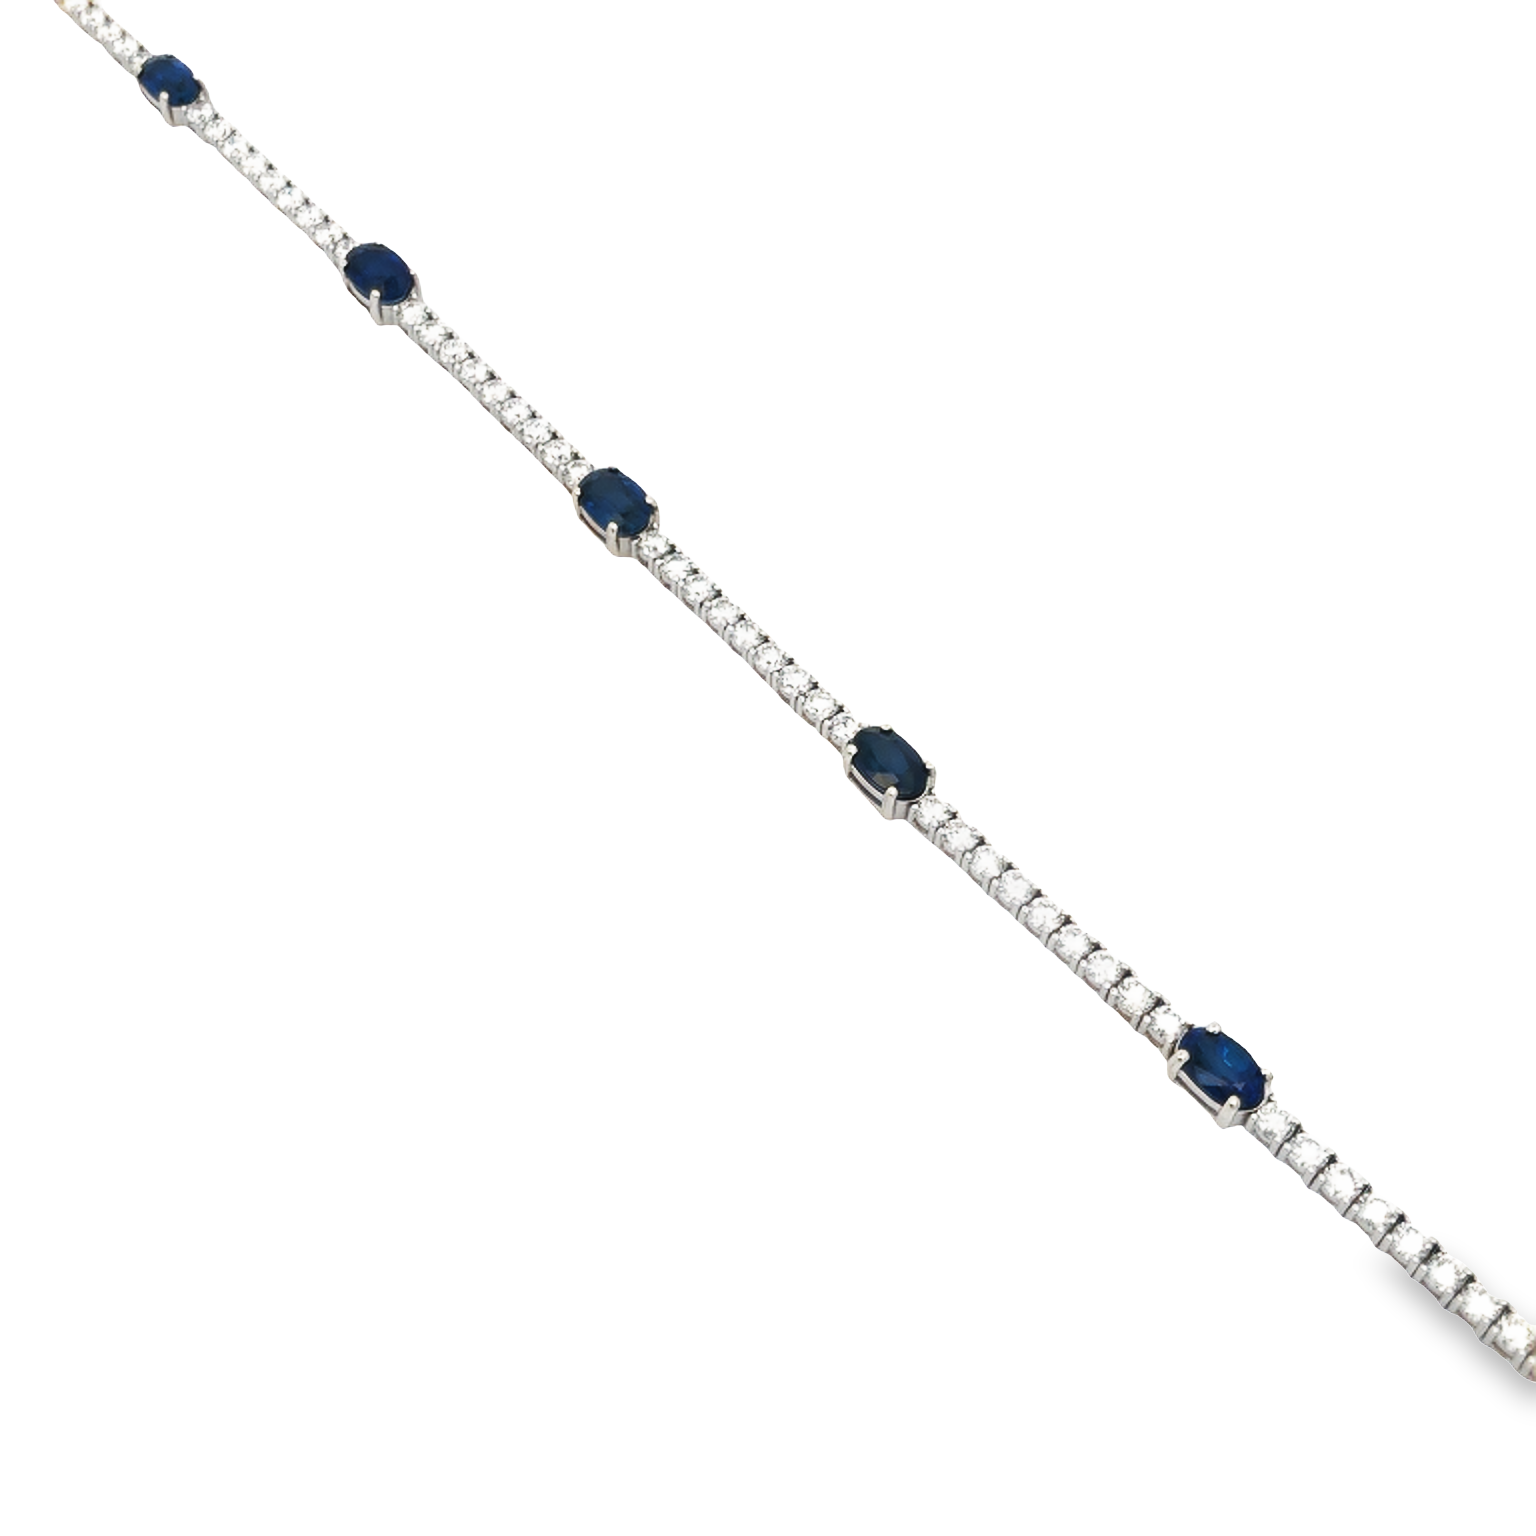 18K White Gold Sapphire and Diamond Bracelet with 5 Oval Sapphires